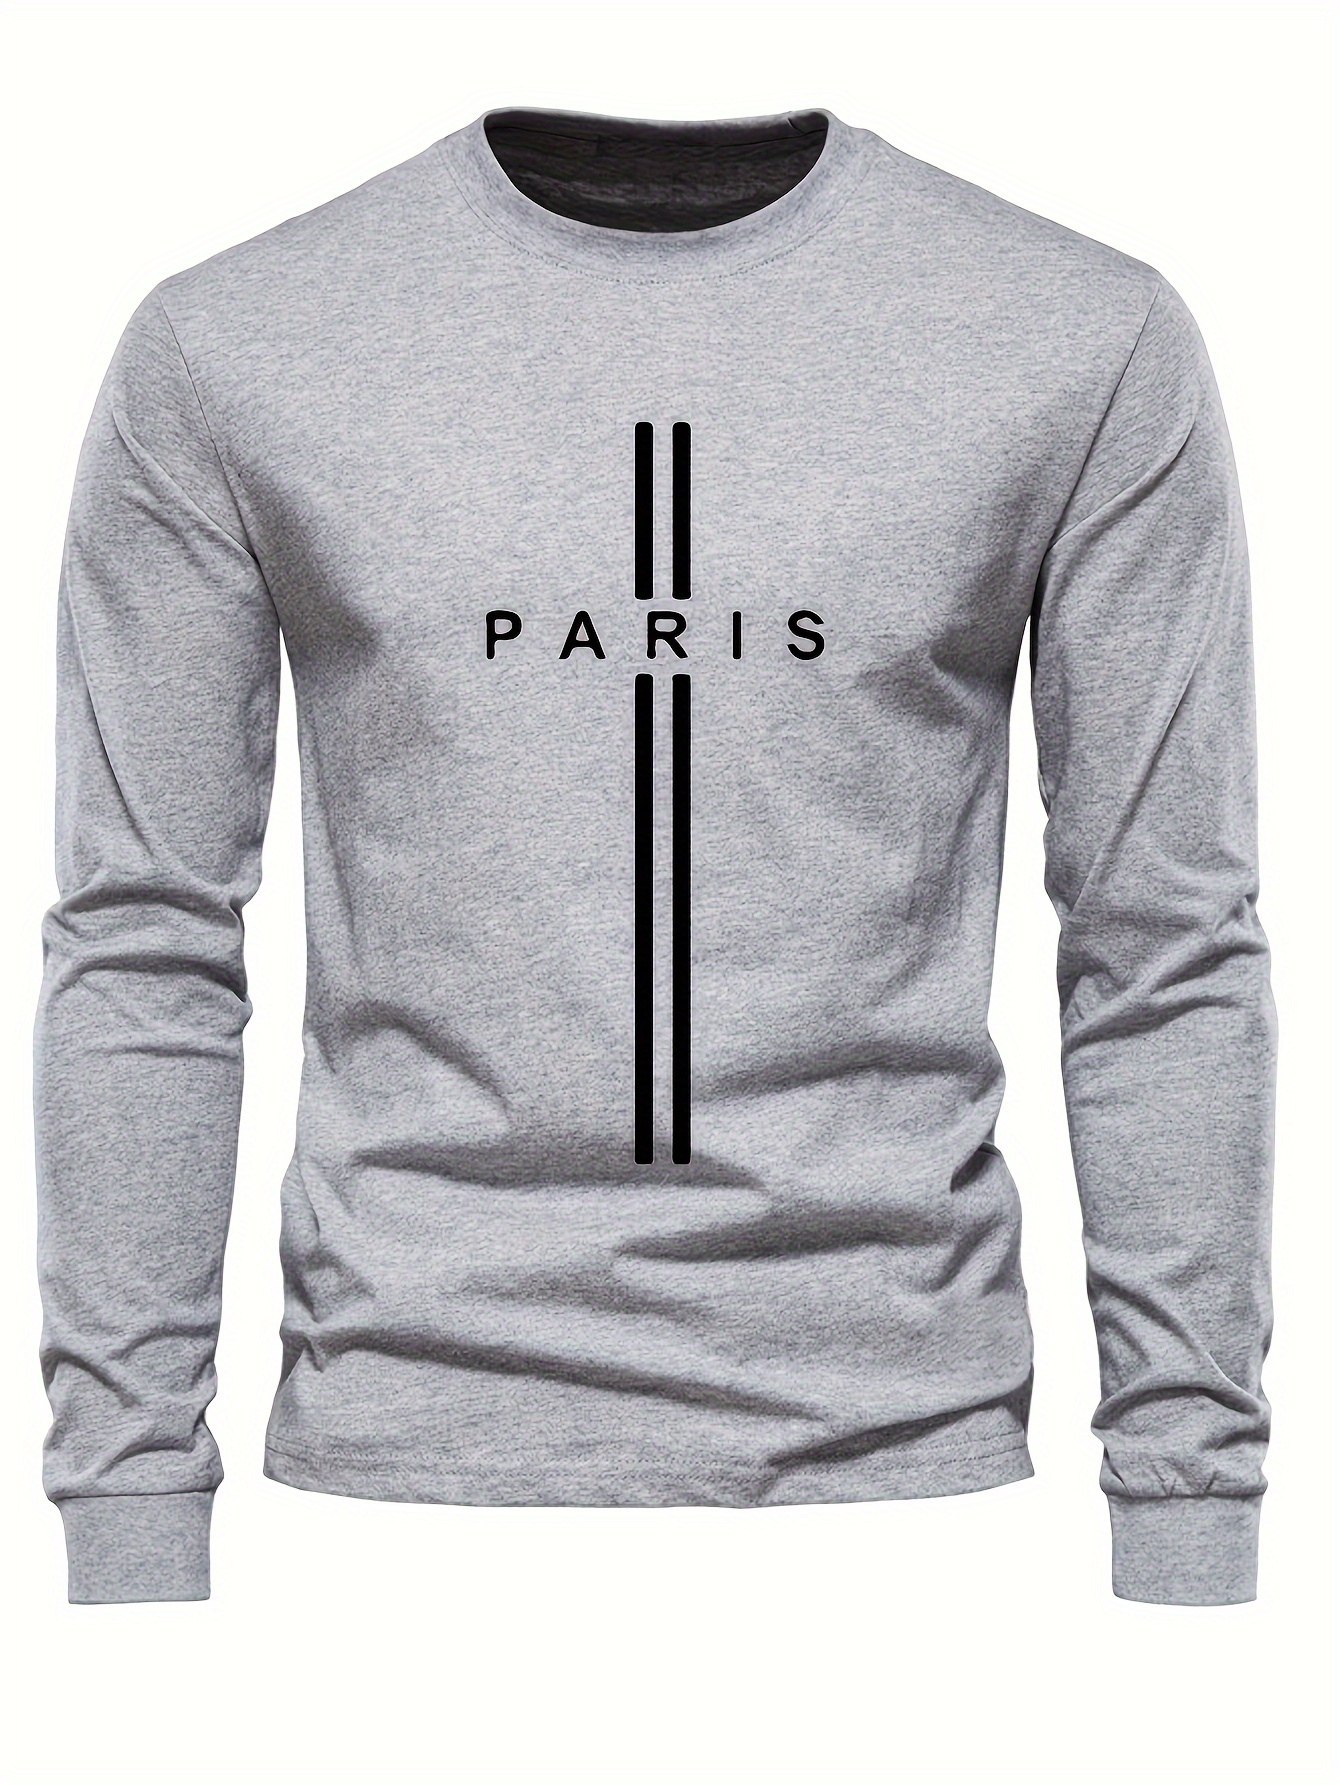 paris print mens graphic design crew neck long sleeve active t shirt tee casual comfy shirts for spring summer autumn mens clothing tops details 9